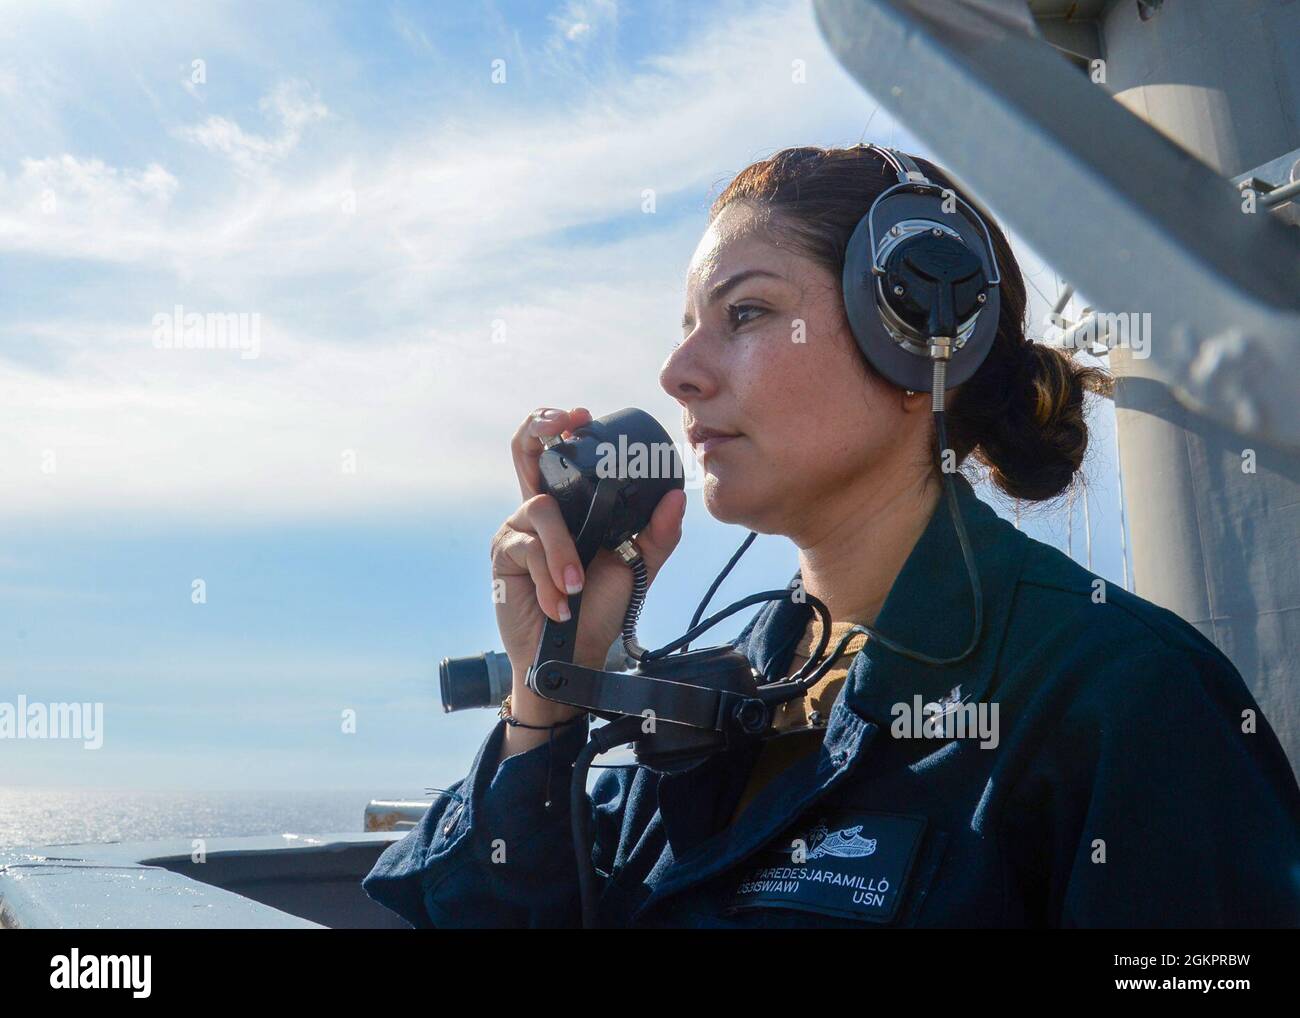 210615-N-PG226-1001 ATLANTIC OCEAN (May 15, 2021) Operations Specialist 3rd Class Stephany Peredezjamarillo, from Miami, communicates using a sound-powered telephone while standing aft lookout watch on the lookout bridge aboard the Nimitz-class aircraft carrier USS Harry S. Truman (CVN 75) during Tailored Ship’s Training Availability (TSTA) and Final Evaluation Problem (FEP). Harry S. Truman, with embarked Carrier Air Wing 1, is underway conducting TSTA and FEP to assess their ability to conduct combat missions, support functions and survive complex casualty control situations in preparation f Stock Photo